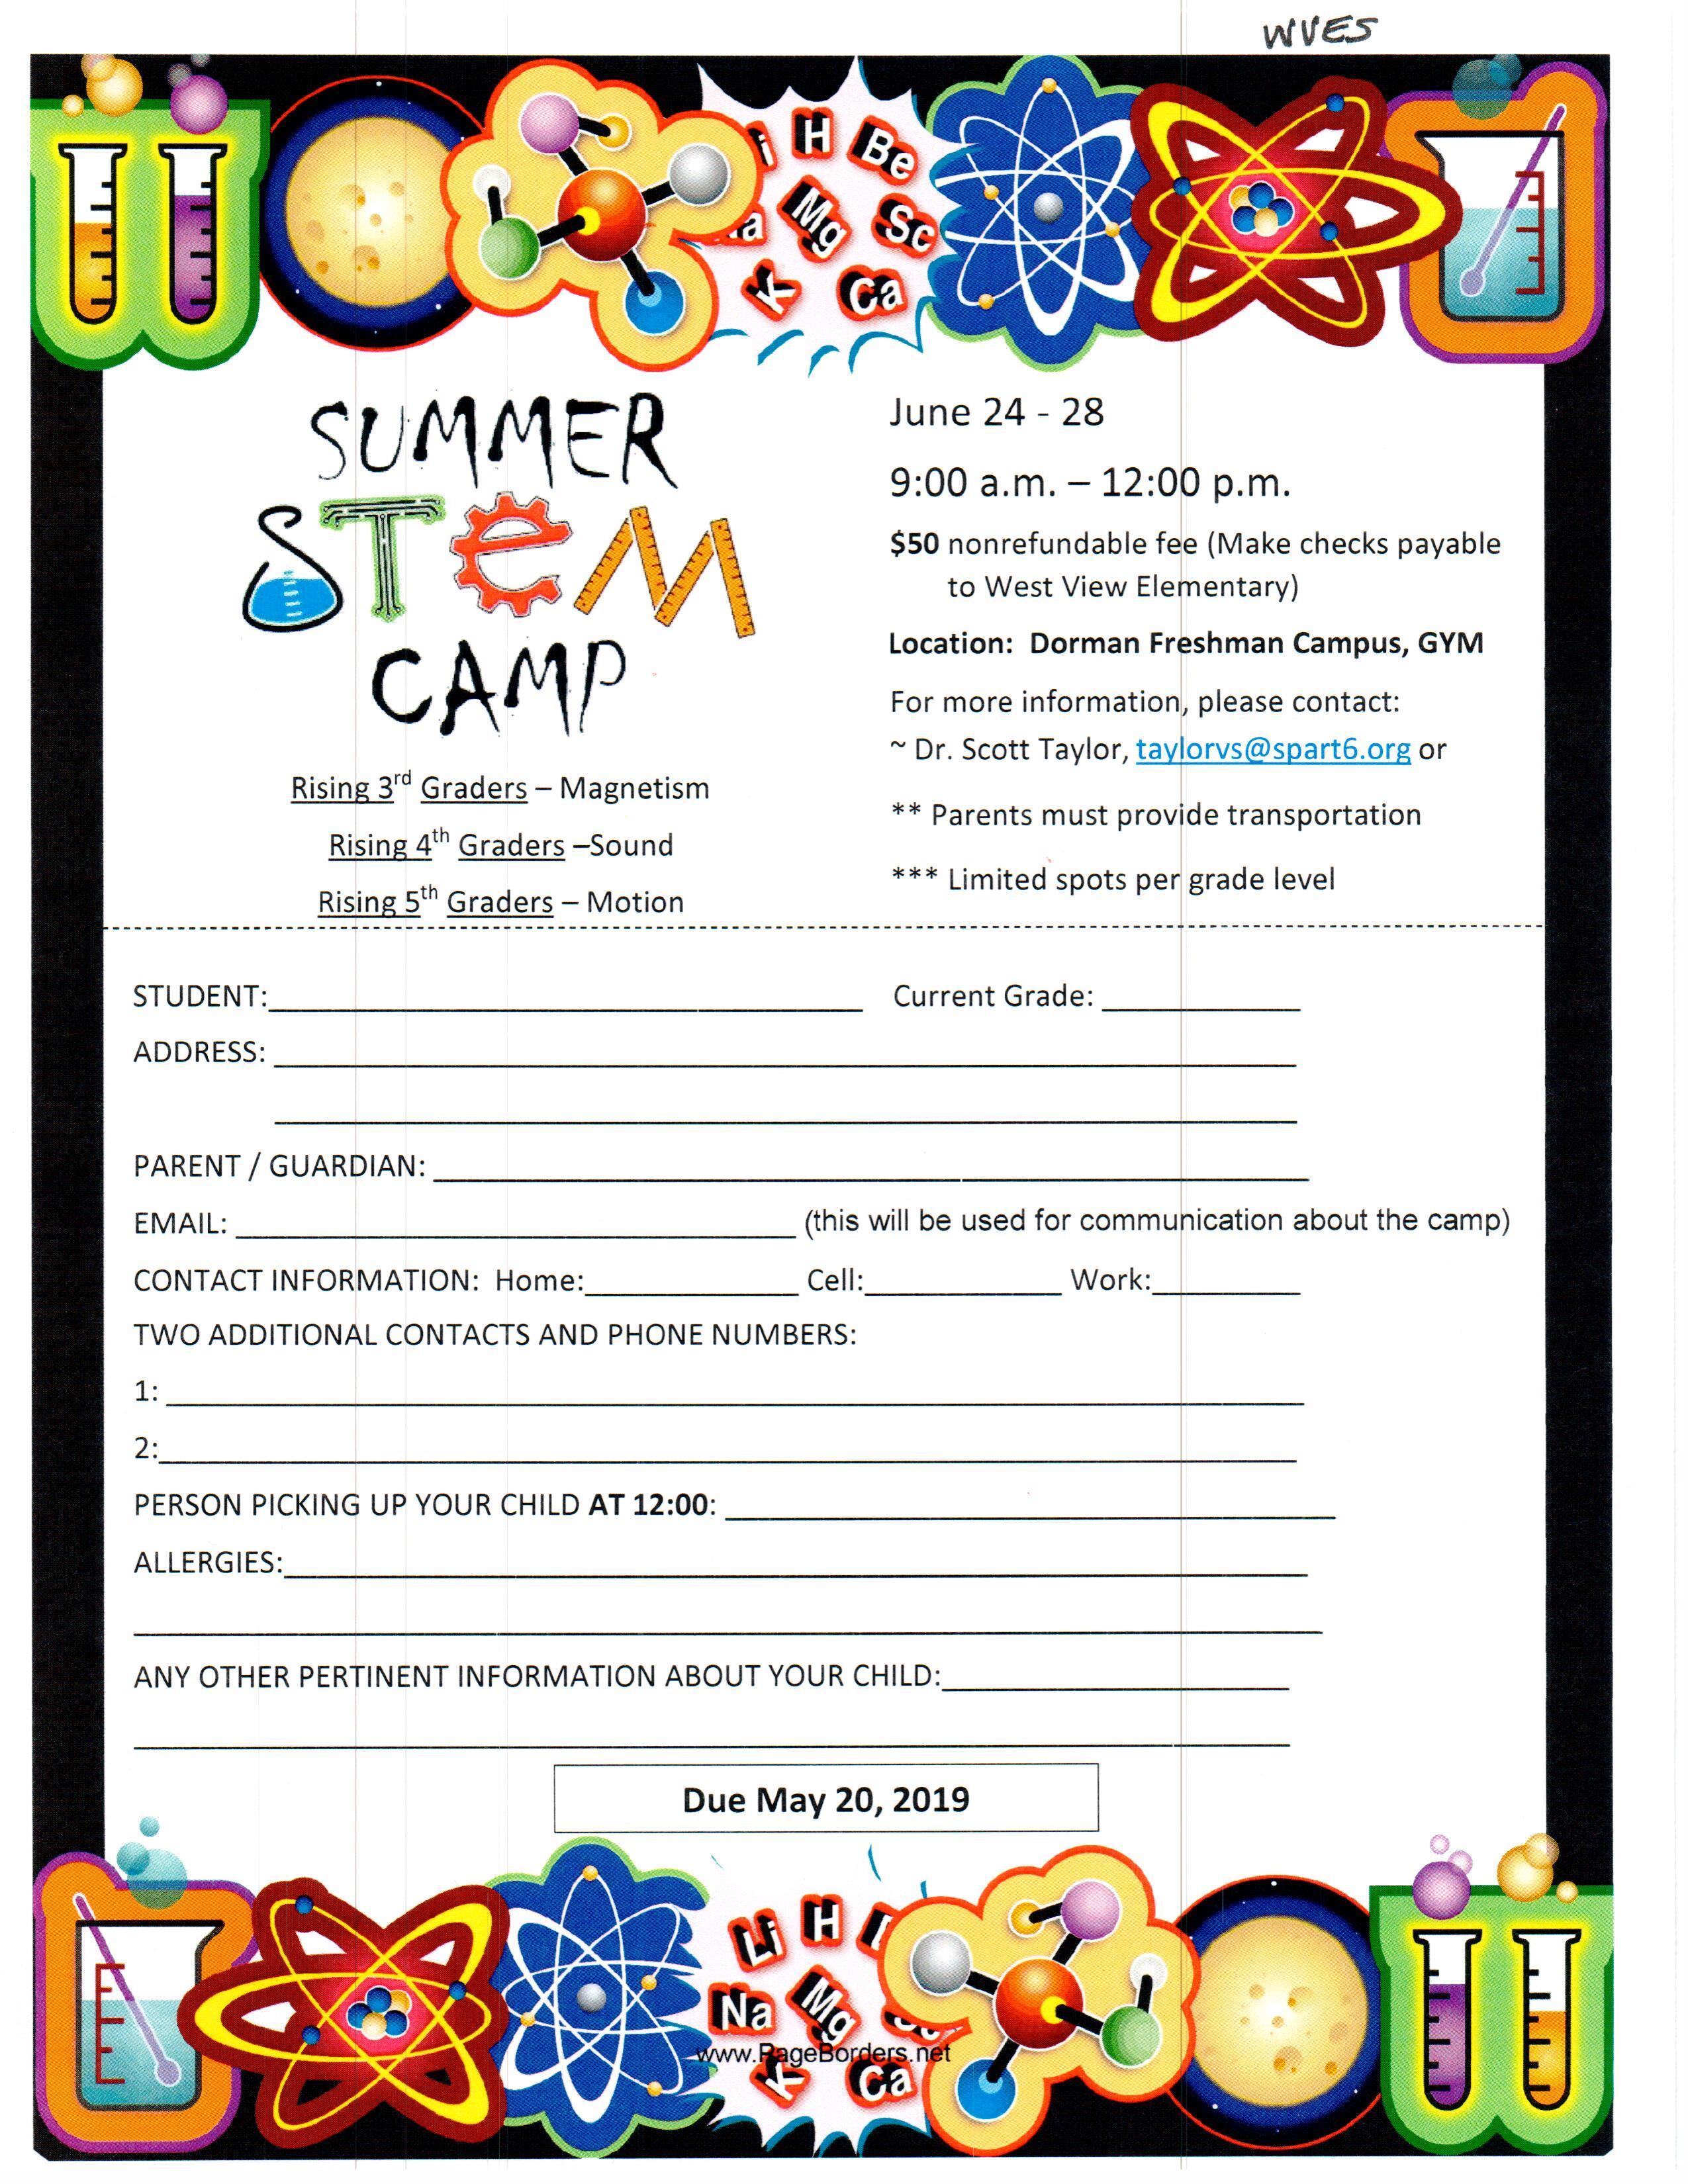 This is the form to fill out if you want to attend the STEM camp. Should you need assistance, please contact Cynthia Robinson at 216-4364.